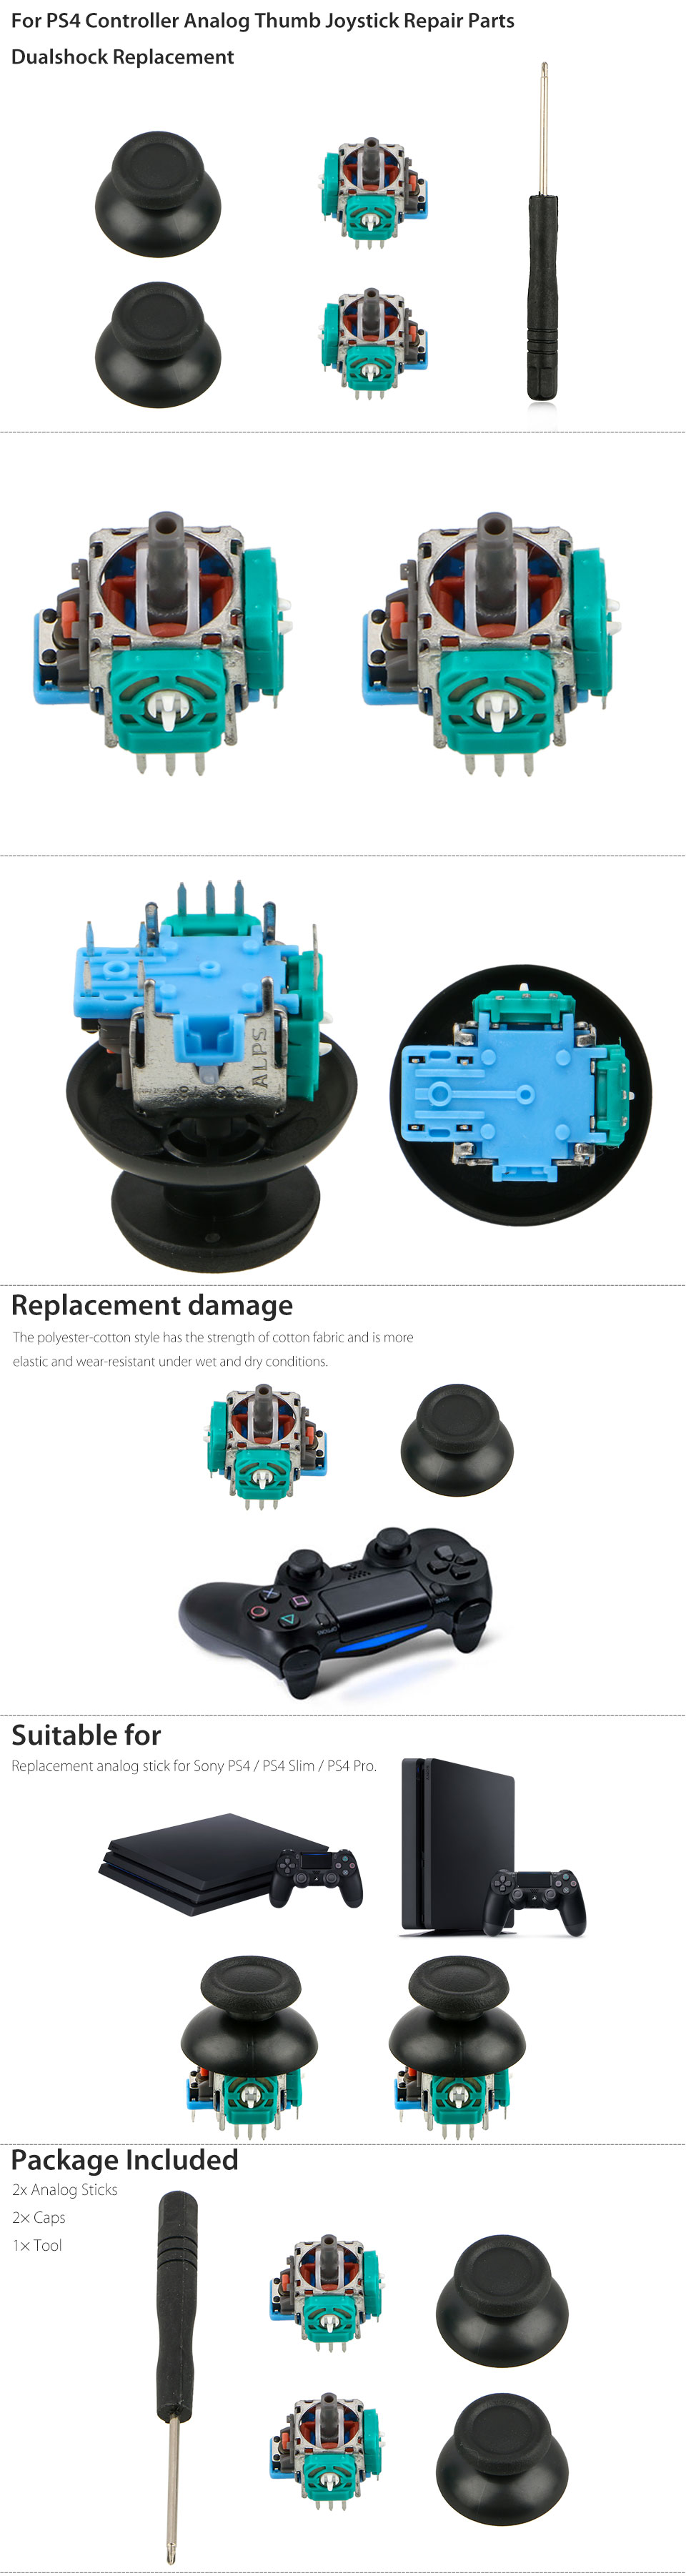 all ps4 controller parts